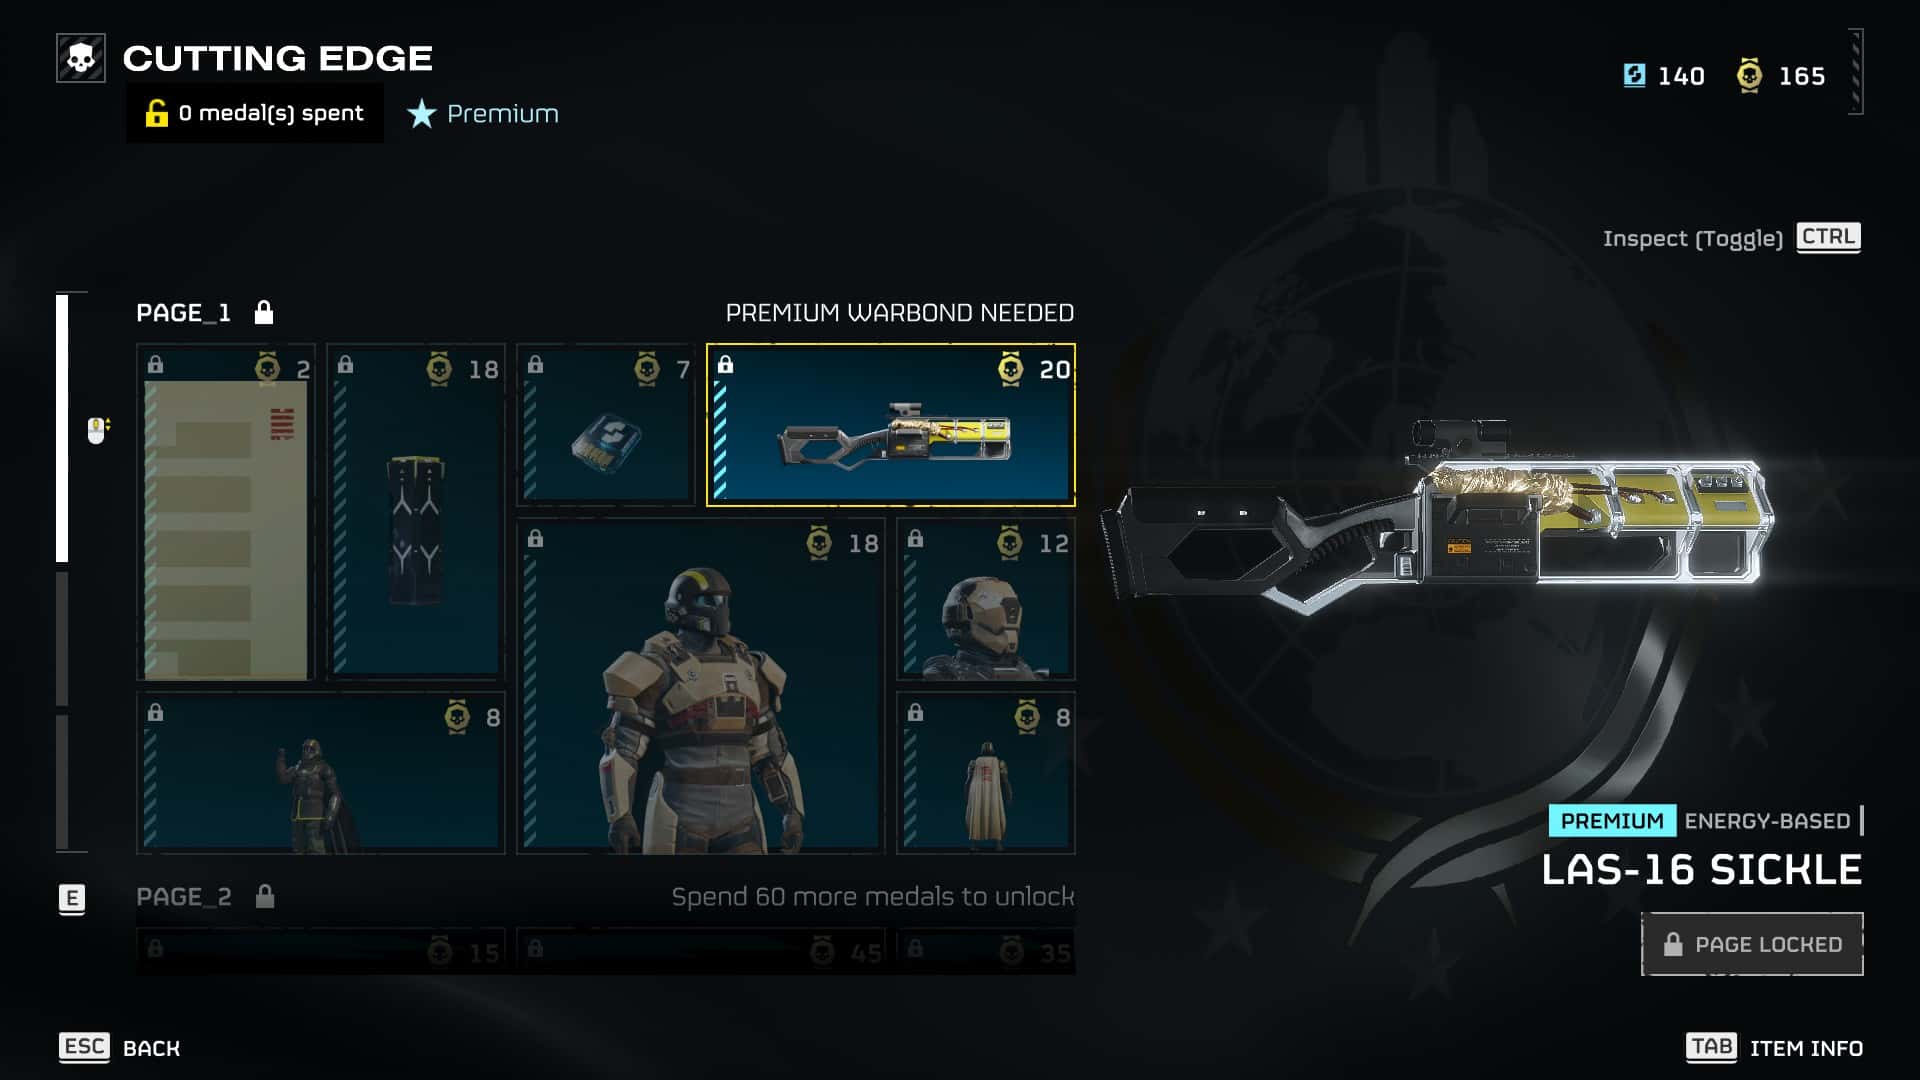 Helldivers 2 LAS-16 Sickle: The LAS-16 Sickle in the Cutting Edge Warbond.